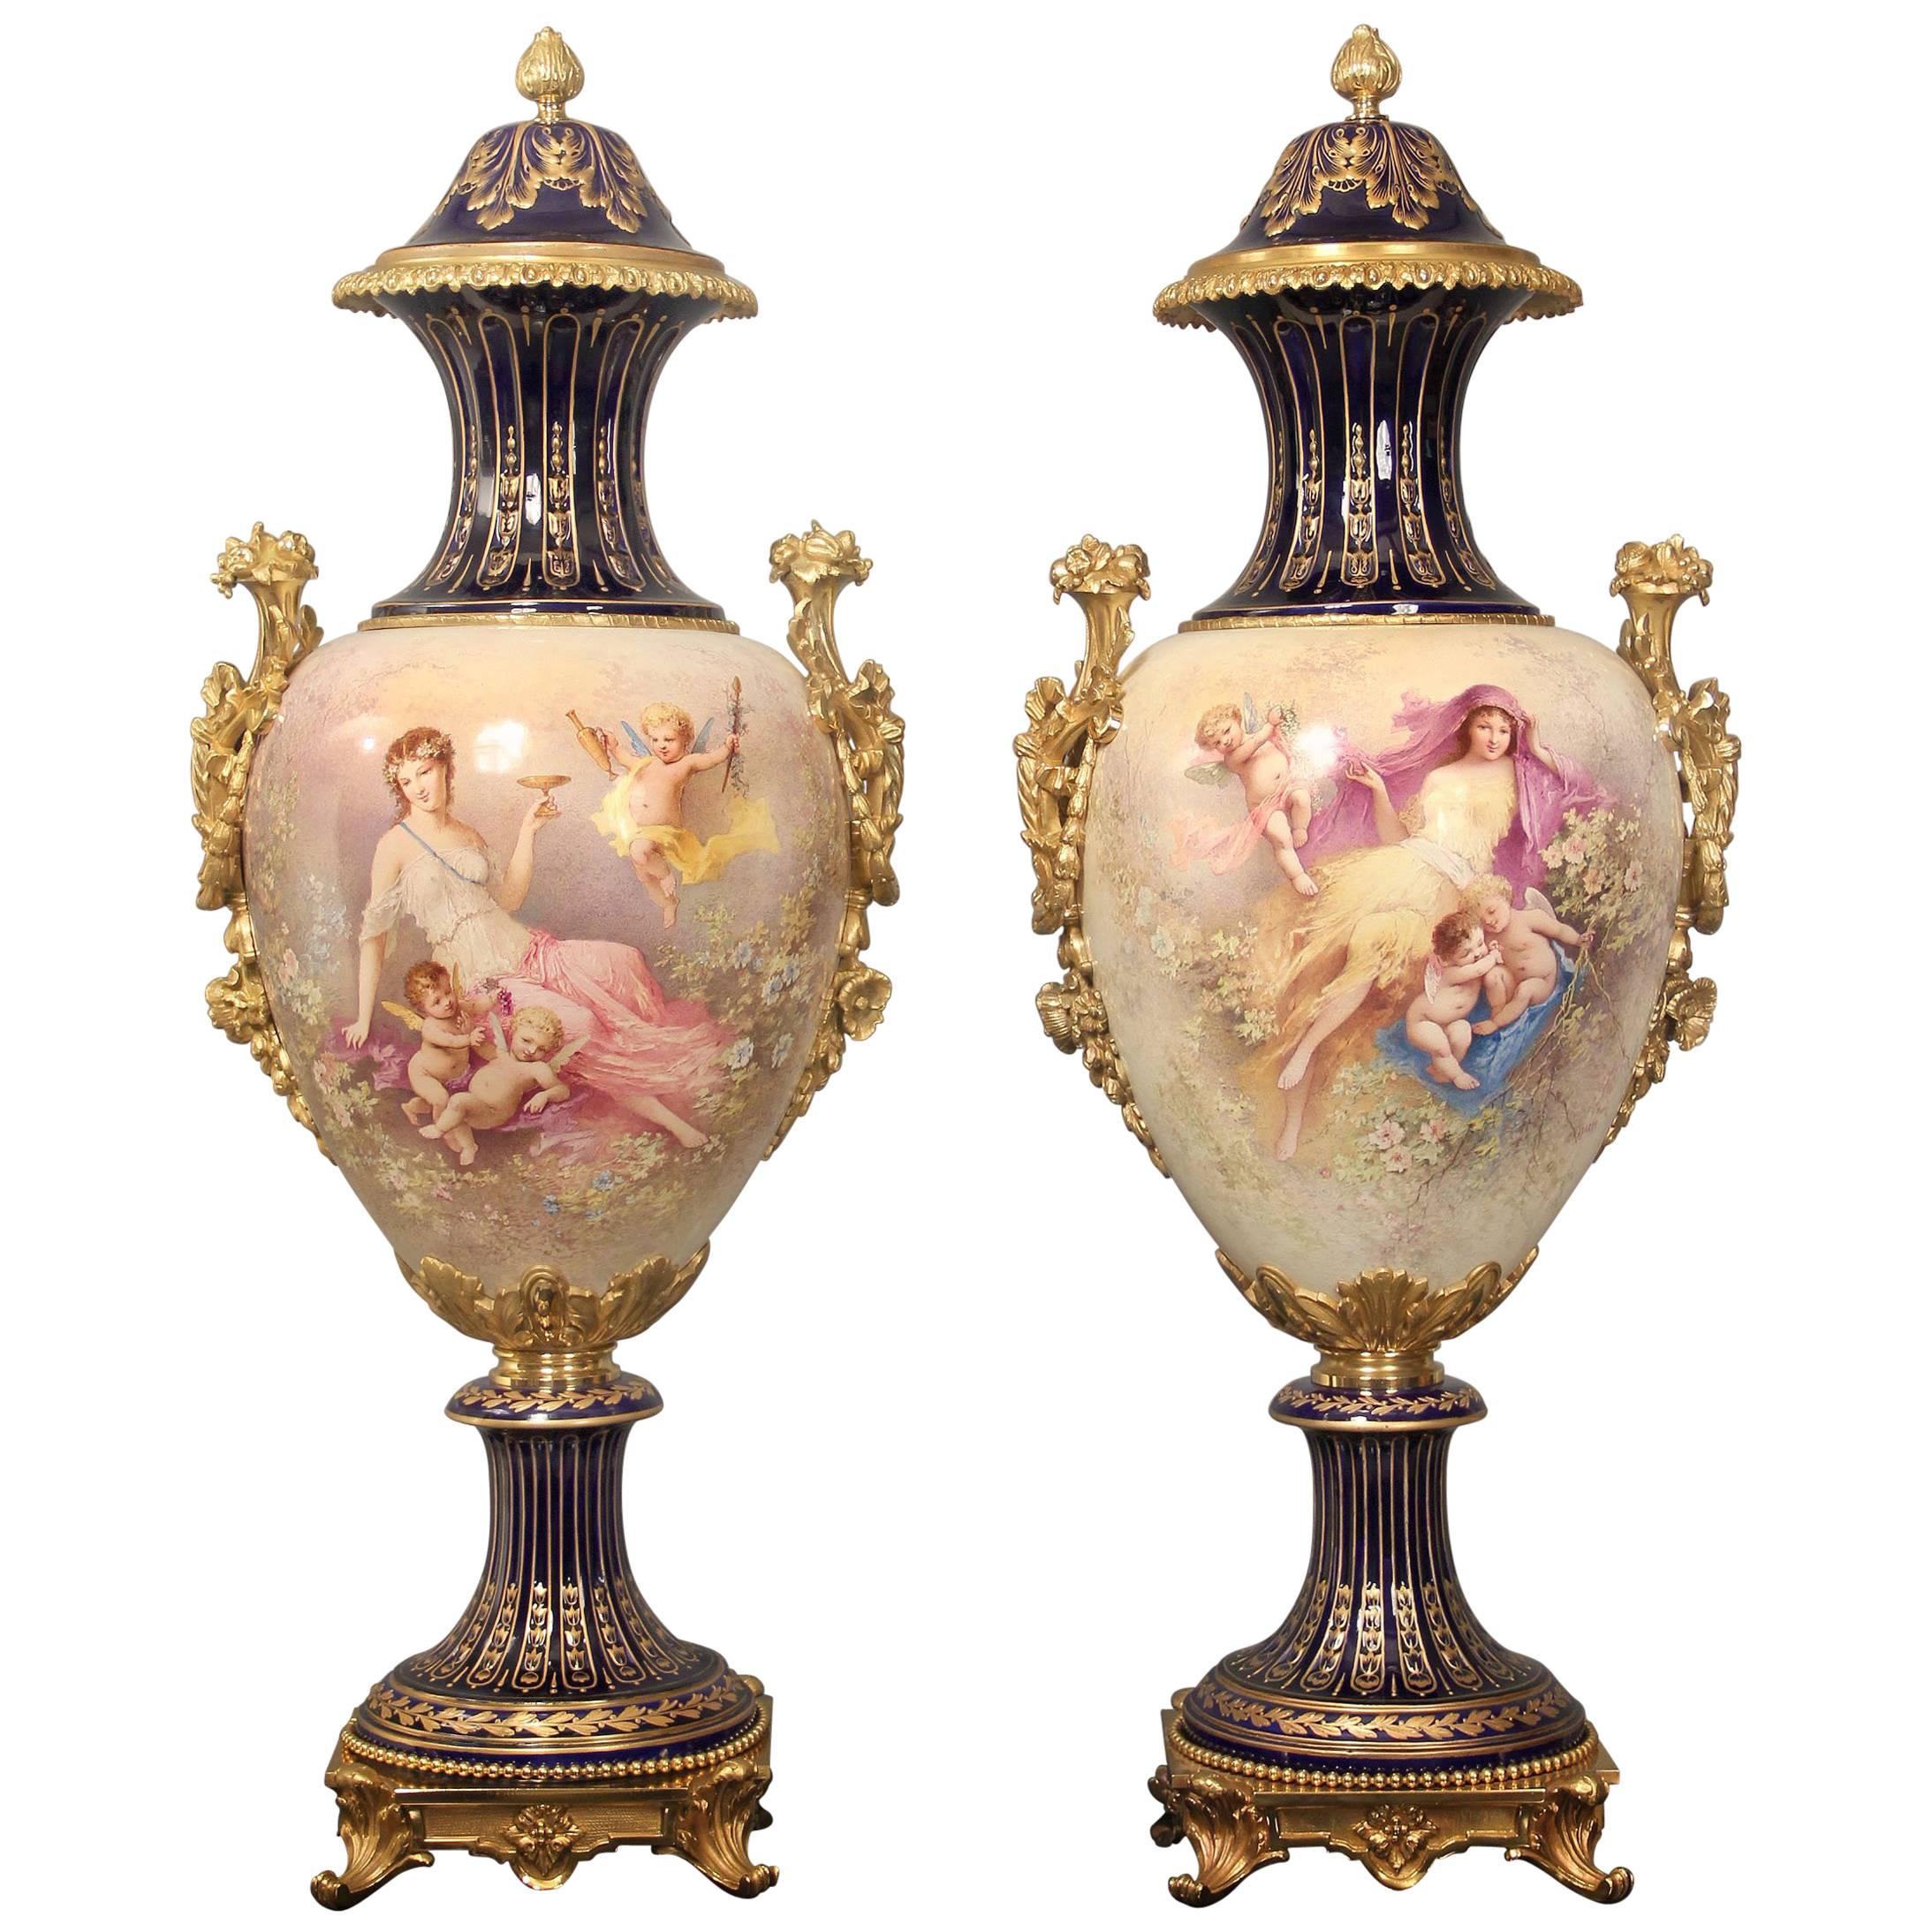 Lovely Pair of Late 19th Century Gilt Bronze Mounted Sèvres Style Vases